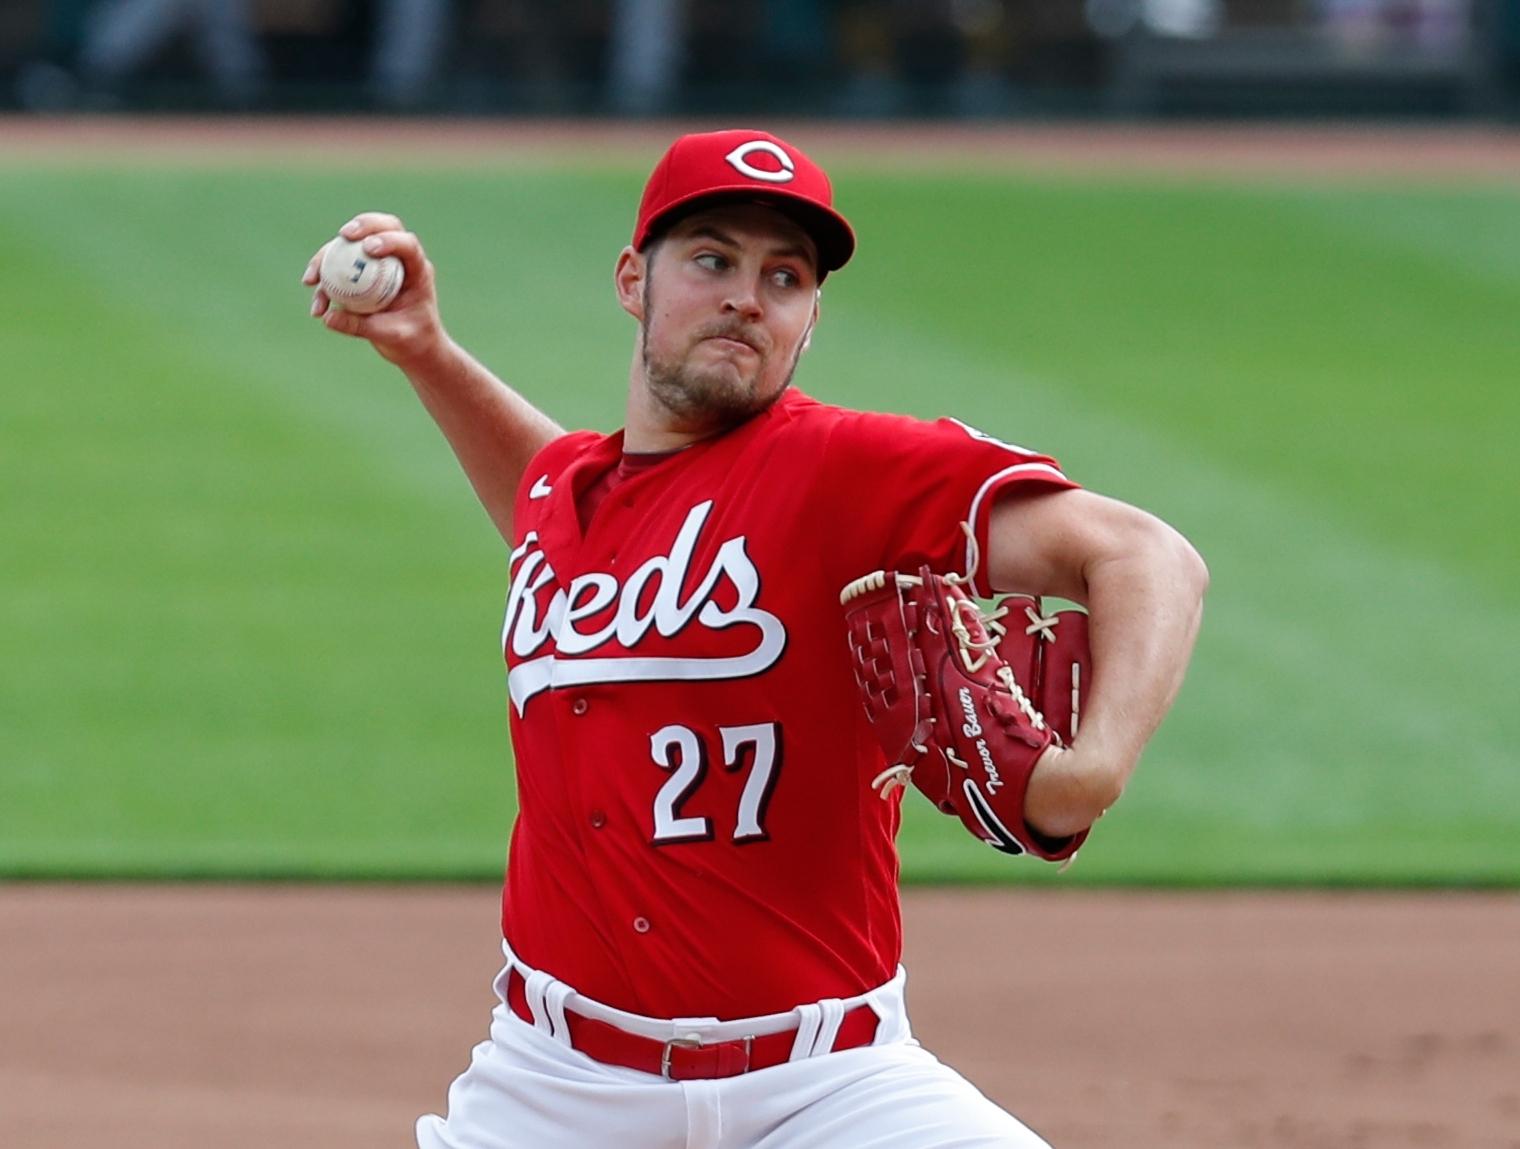 Sep 14, 2020; Cincinnati, Ohio, USA; Cincinnati Reds starting pitcher Trevor Bauer (27) throws against the Pittsburgh Pirates in the first inning during Game One of a doubleheader at Great American Ball Park. Mandatory Credit: David Kohl-USA TODAY Sports / © David Kohl-USA TODAY Sports